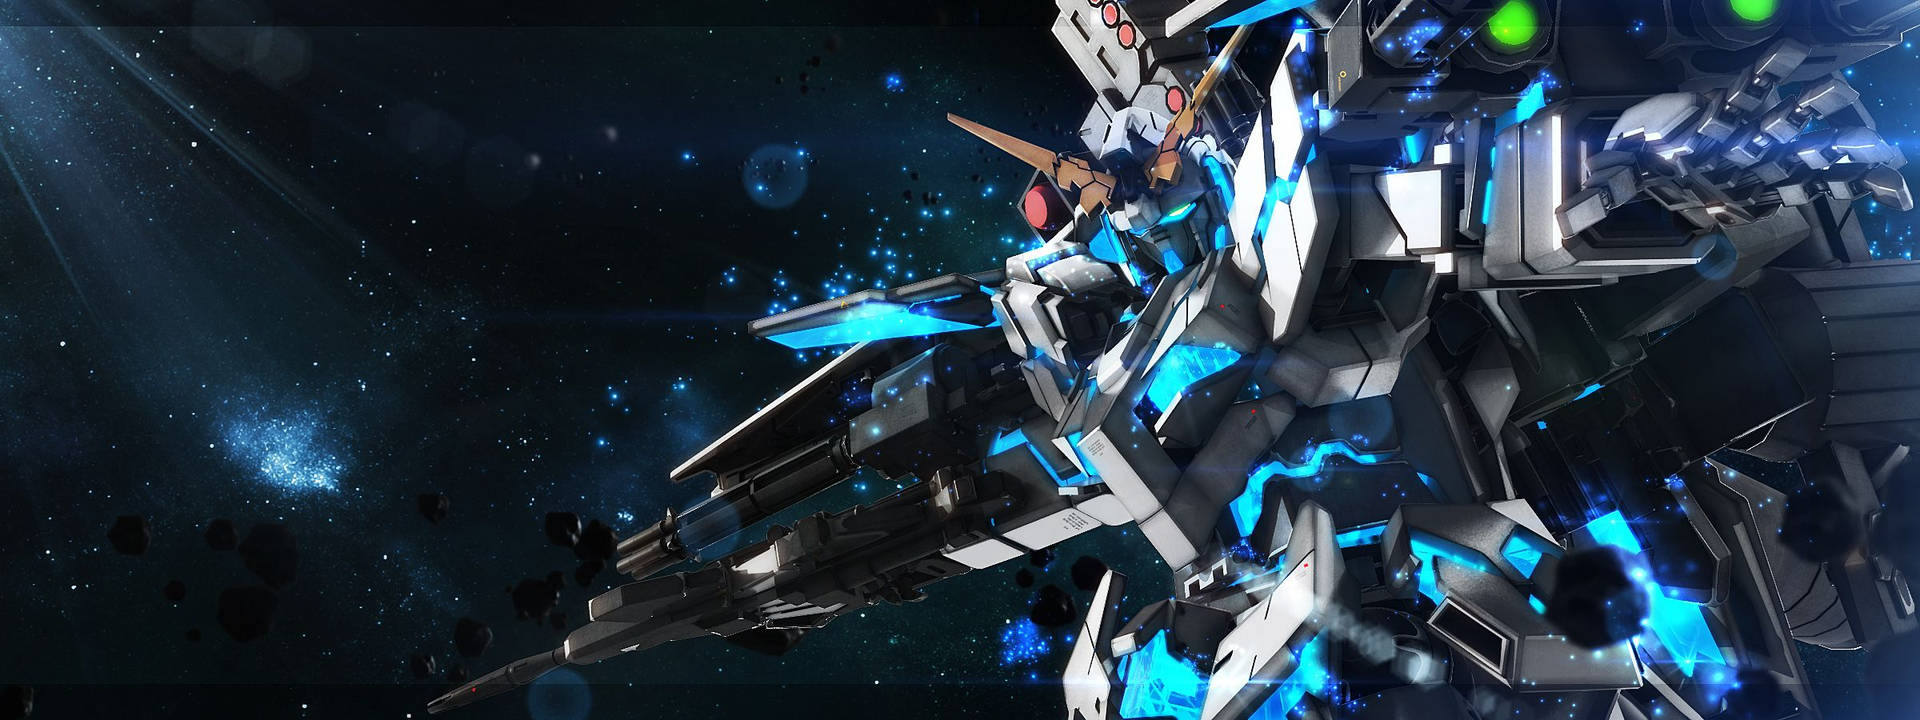 Marvel at the Magnificence of the Unicorn Gundam Wallpaper